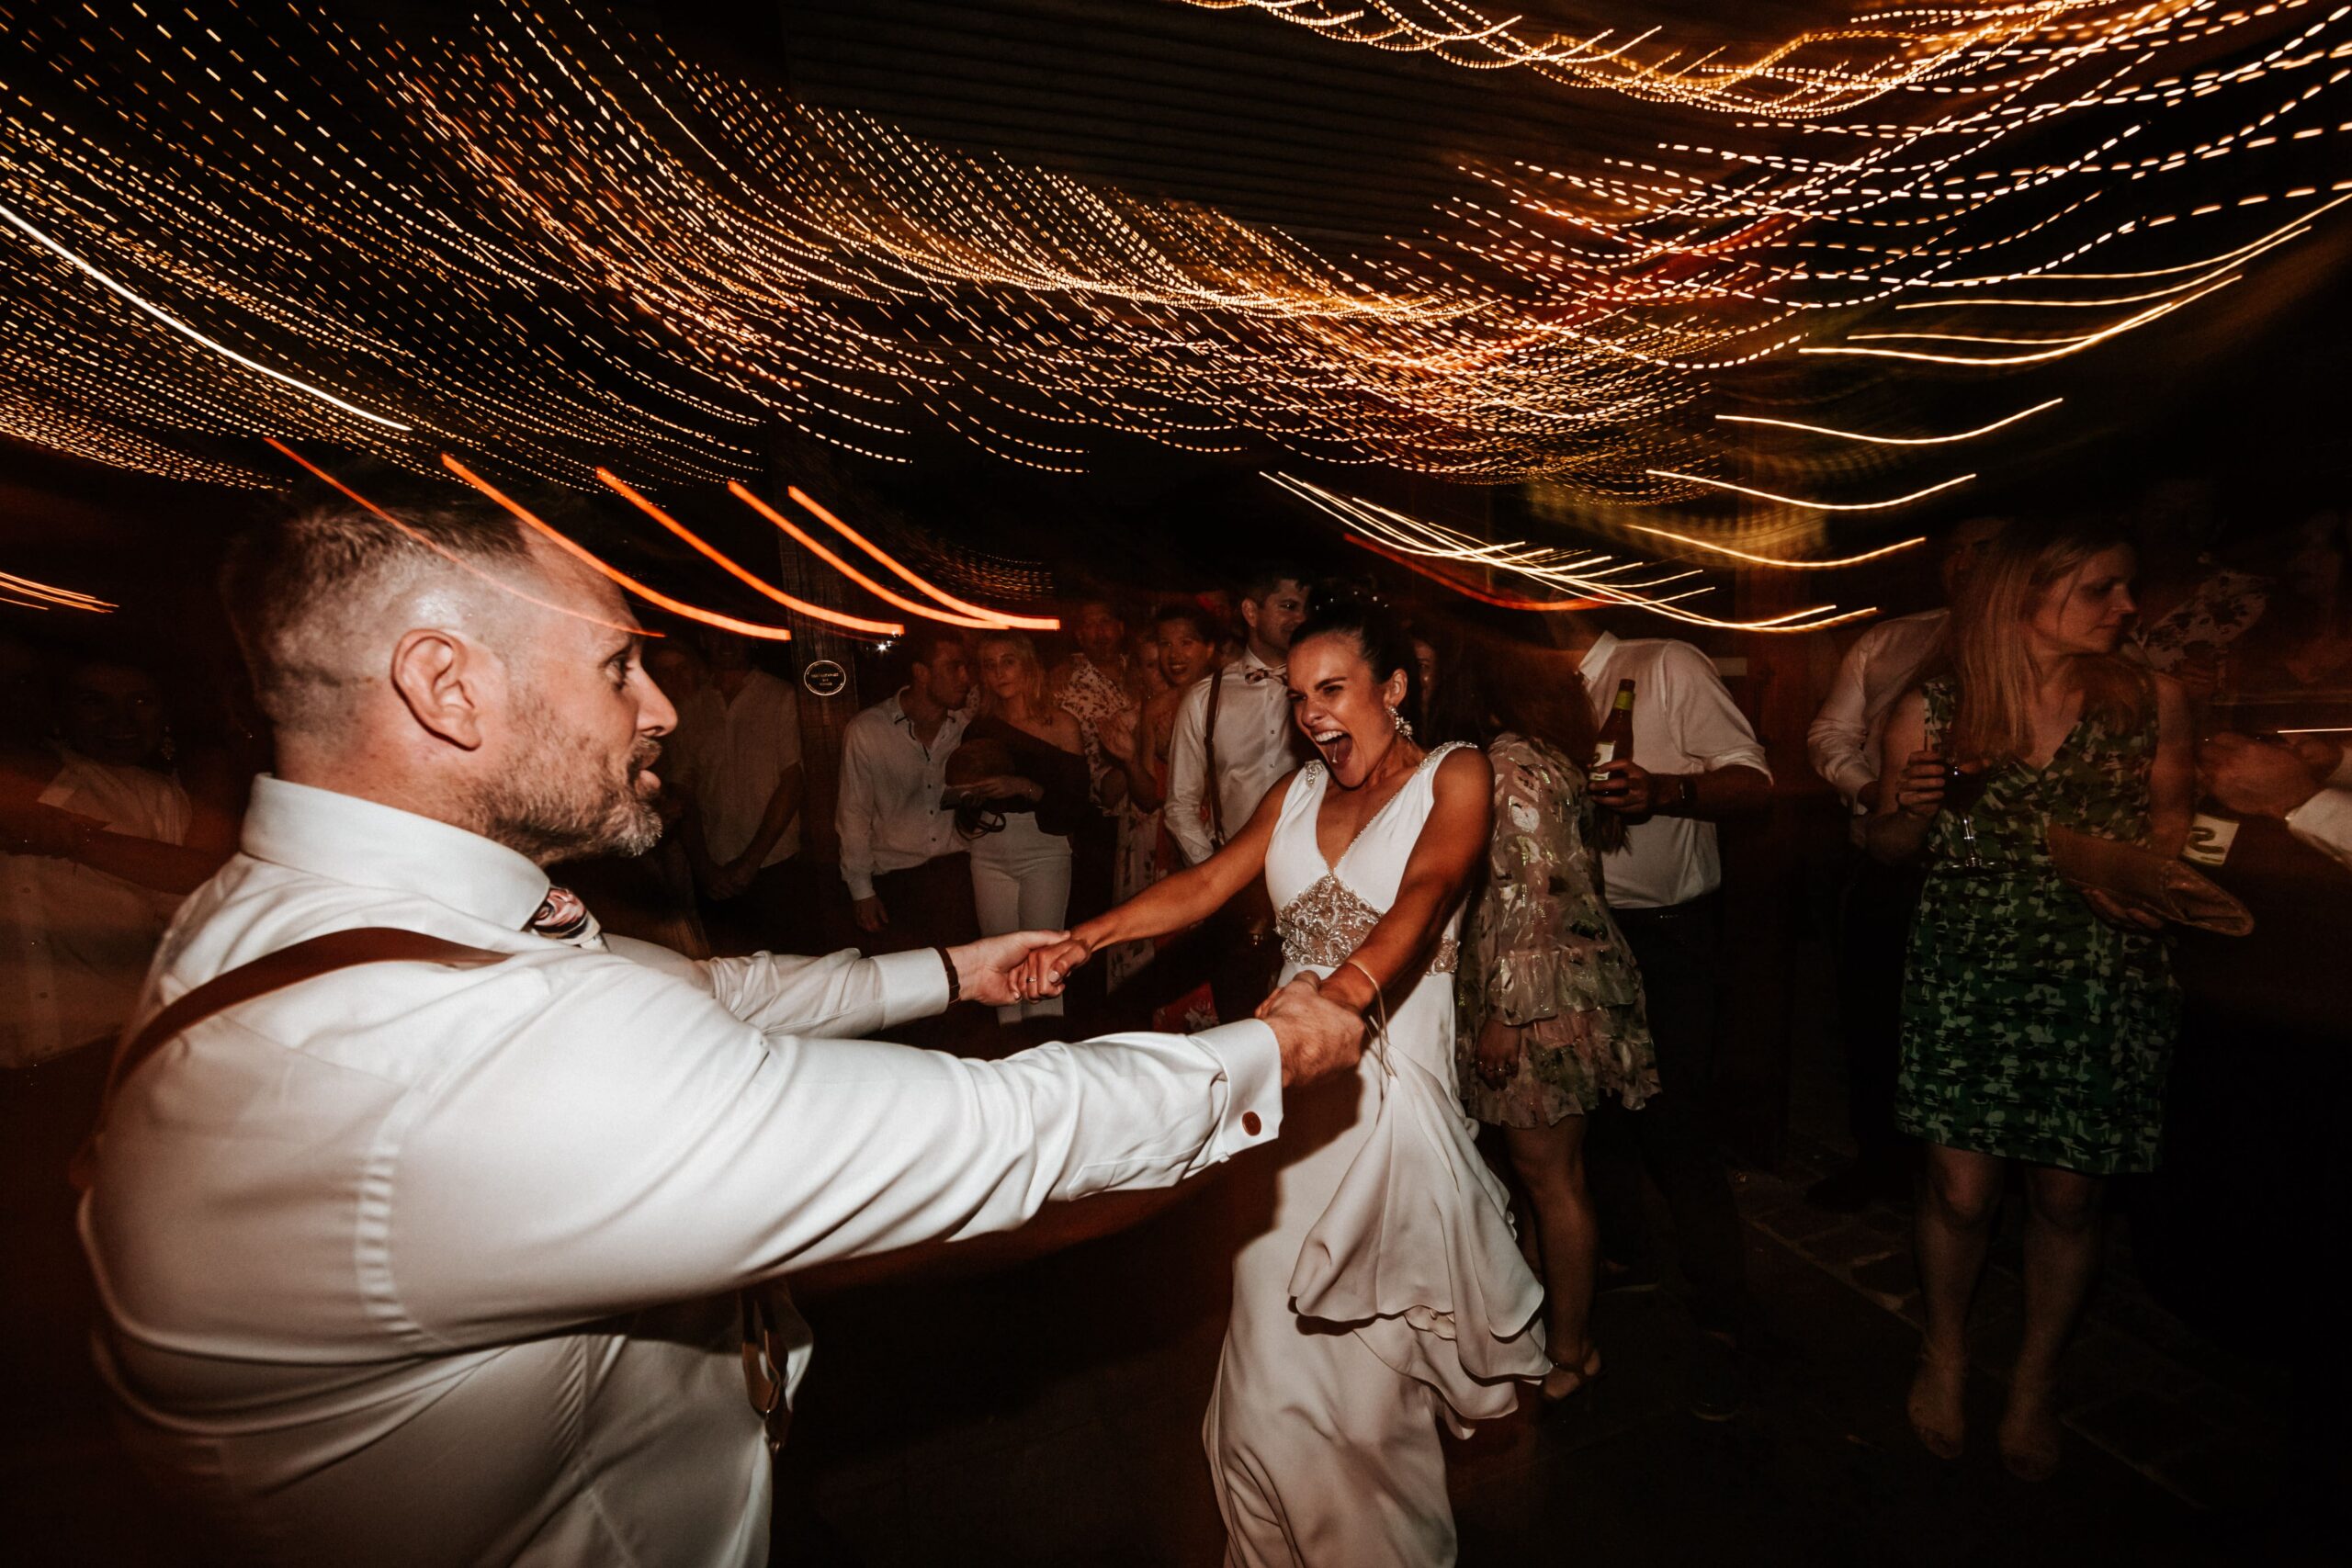 joyous dance floor moment at a wedding reception, with a bride in white spinning into the arms of a man in a suit, under a canopy of twinkling fairy lights creating a vibrant bokeh effect